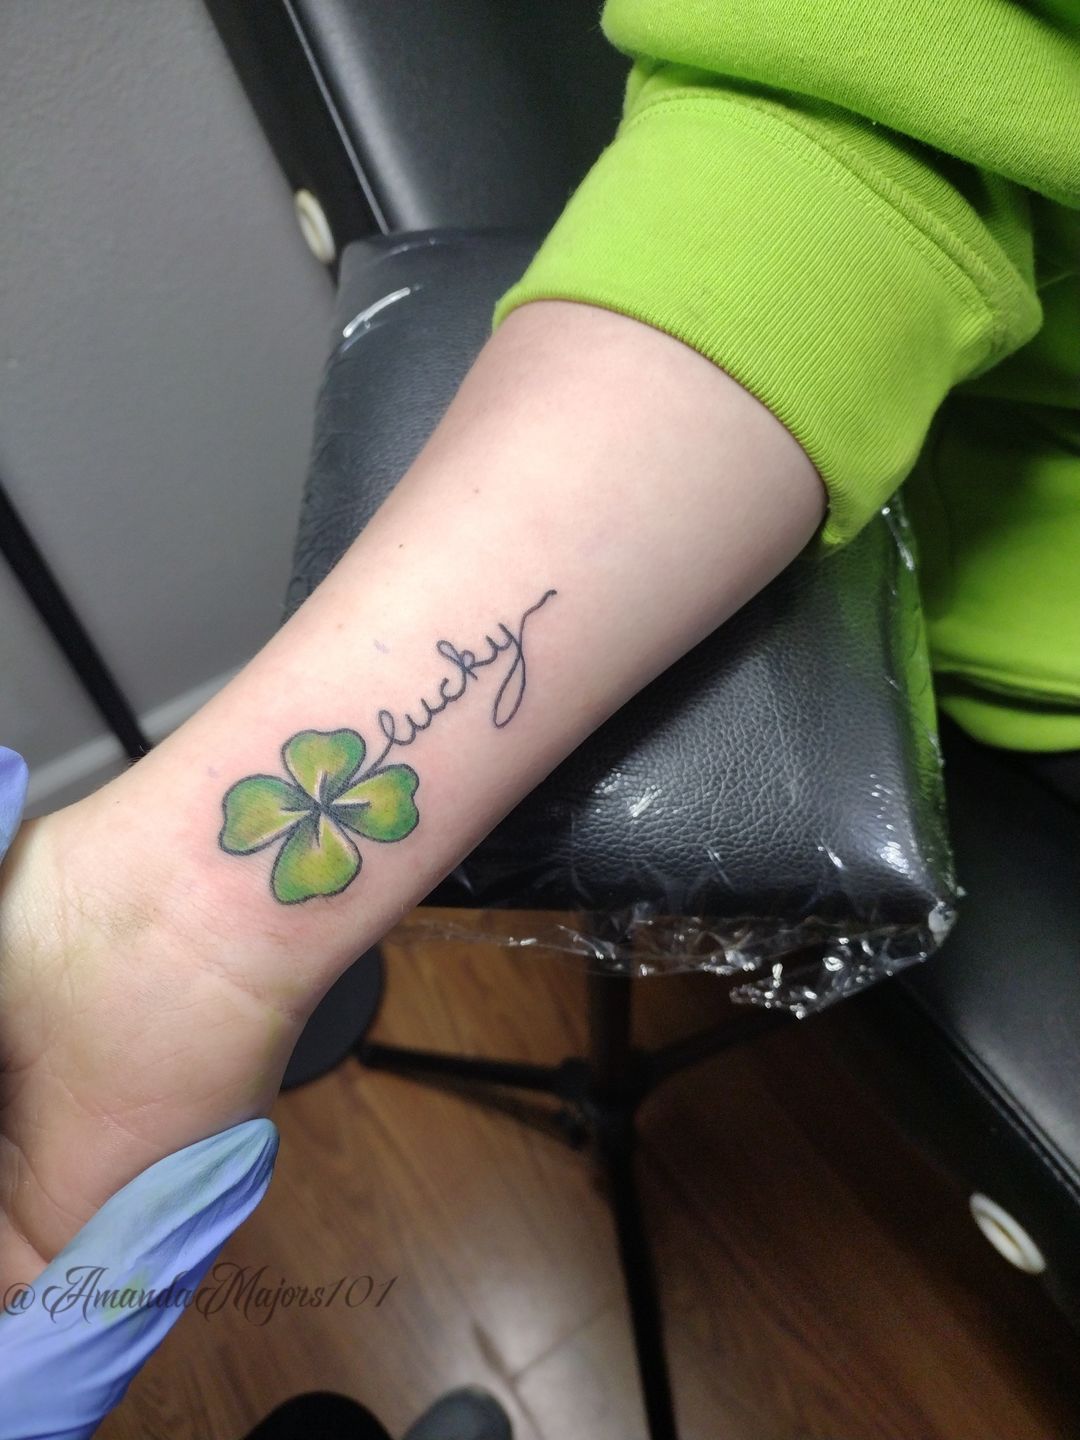 55 Shamrock Tattoo Ideas with Meaning | Art and Design